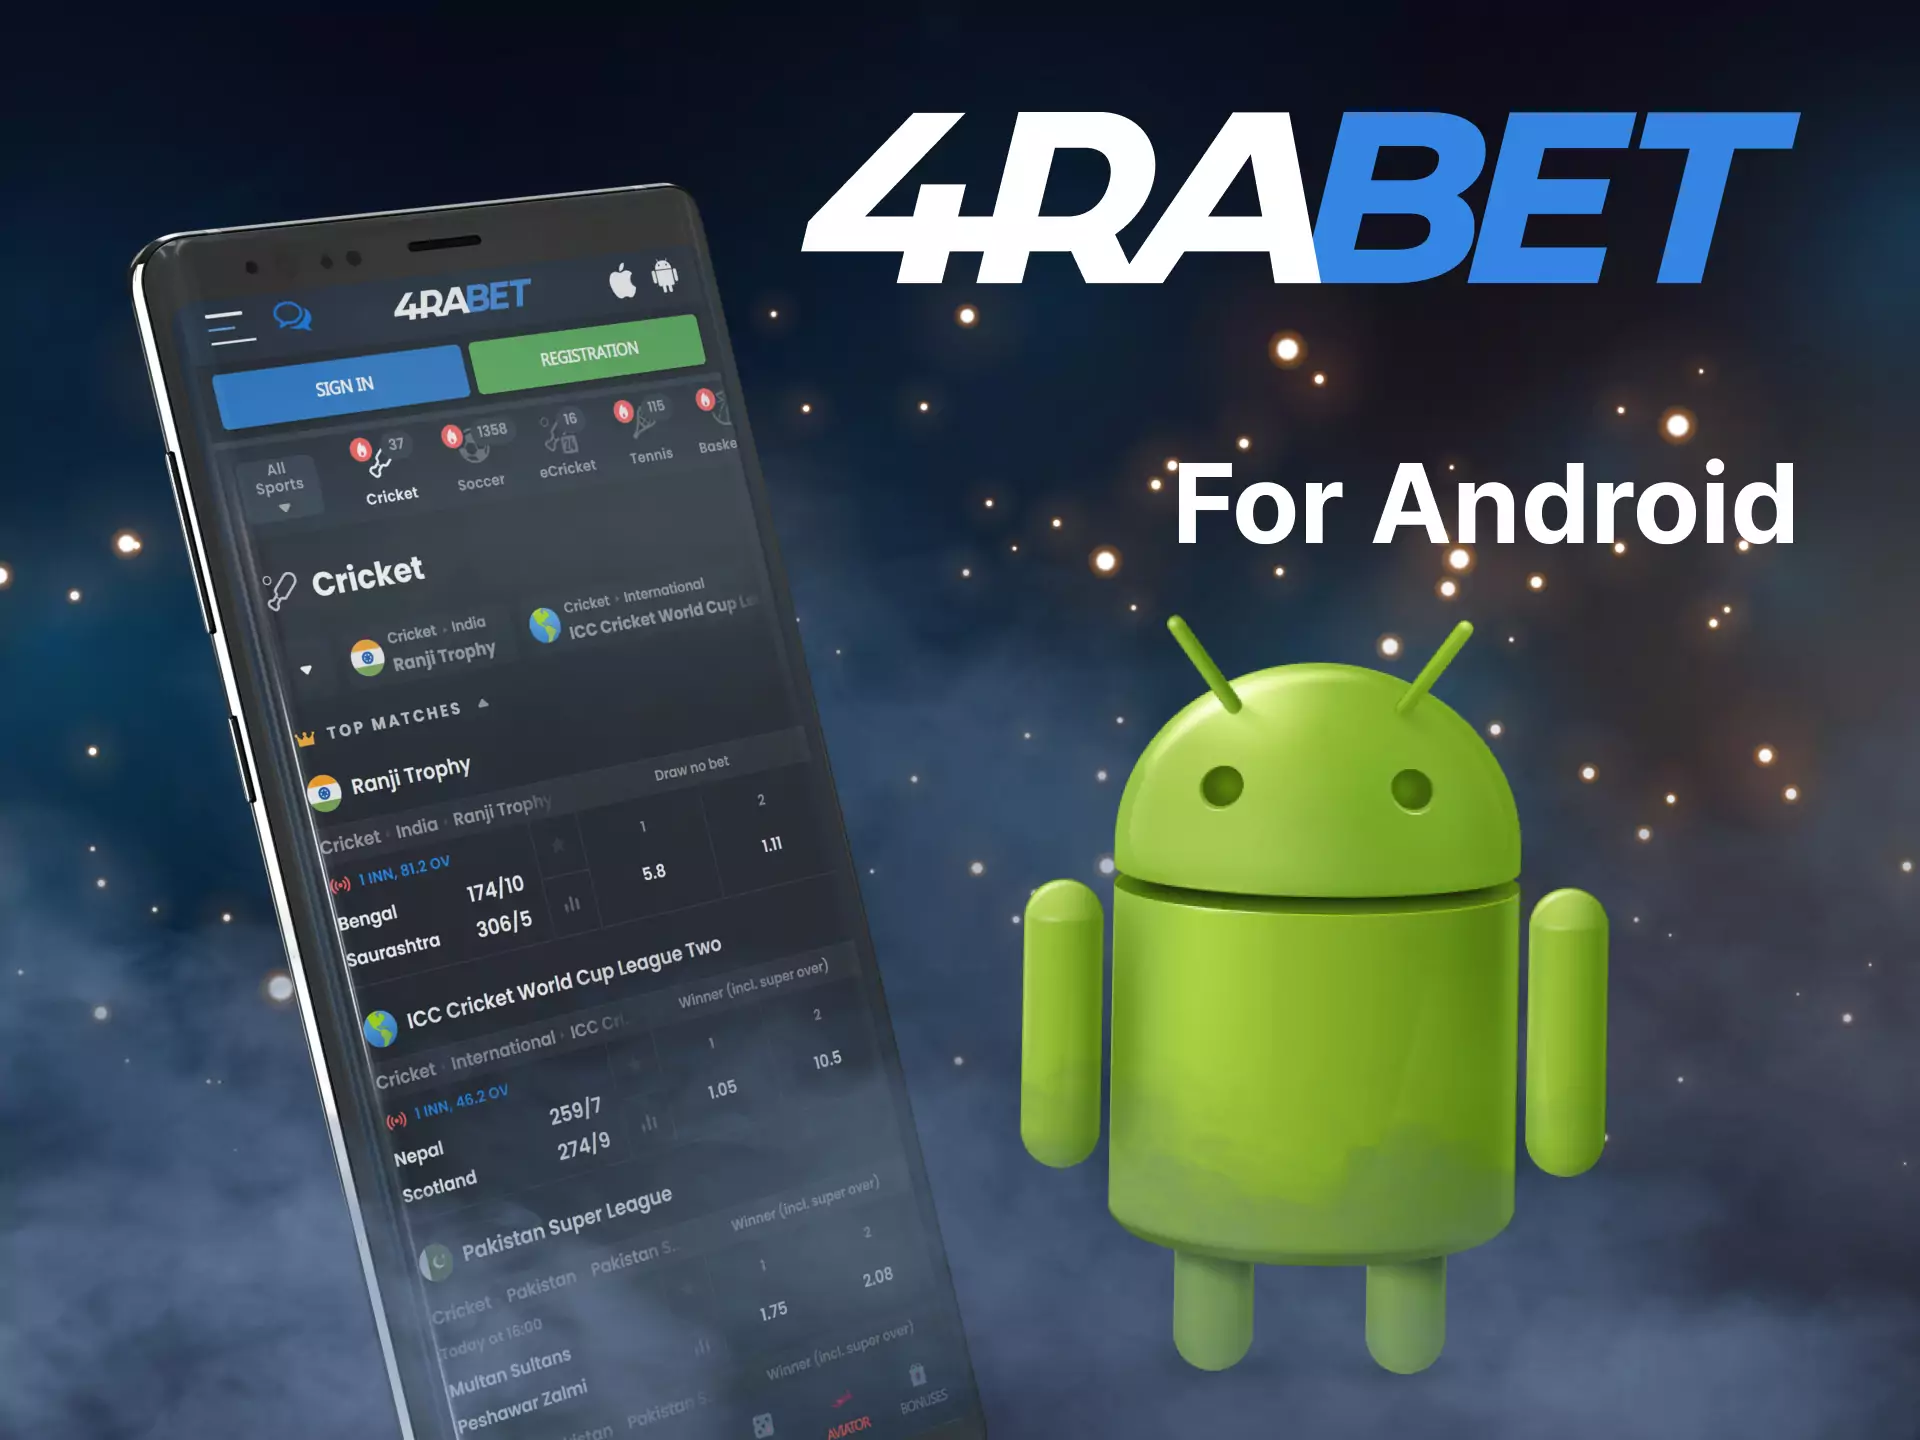 How Much Do You Charge For 4rabet download apk